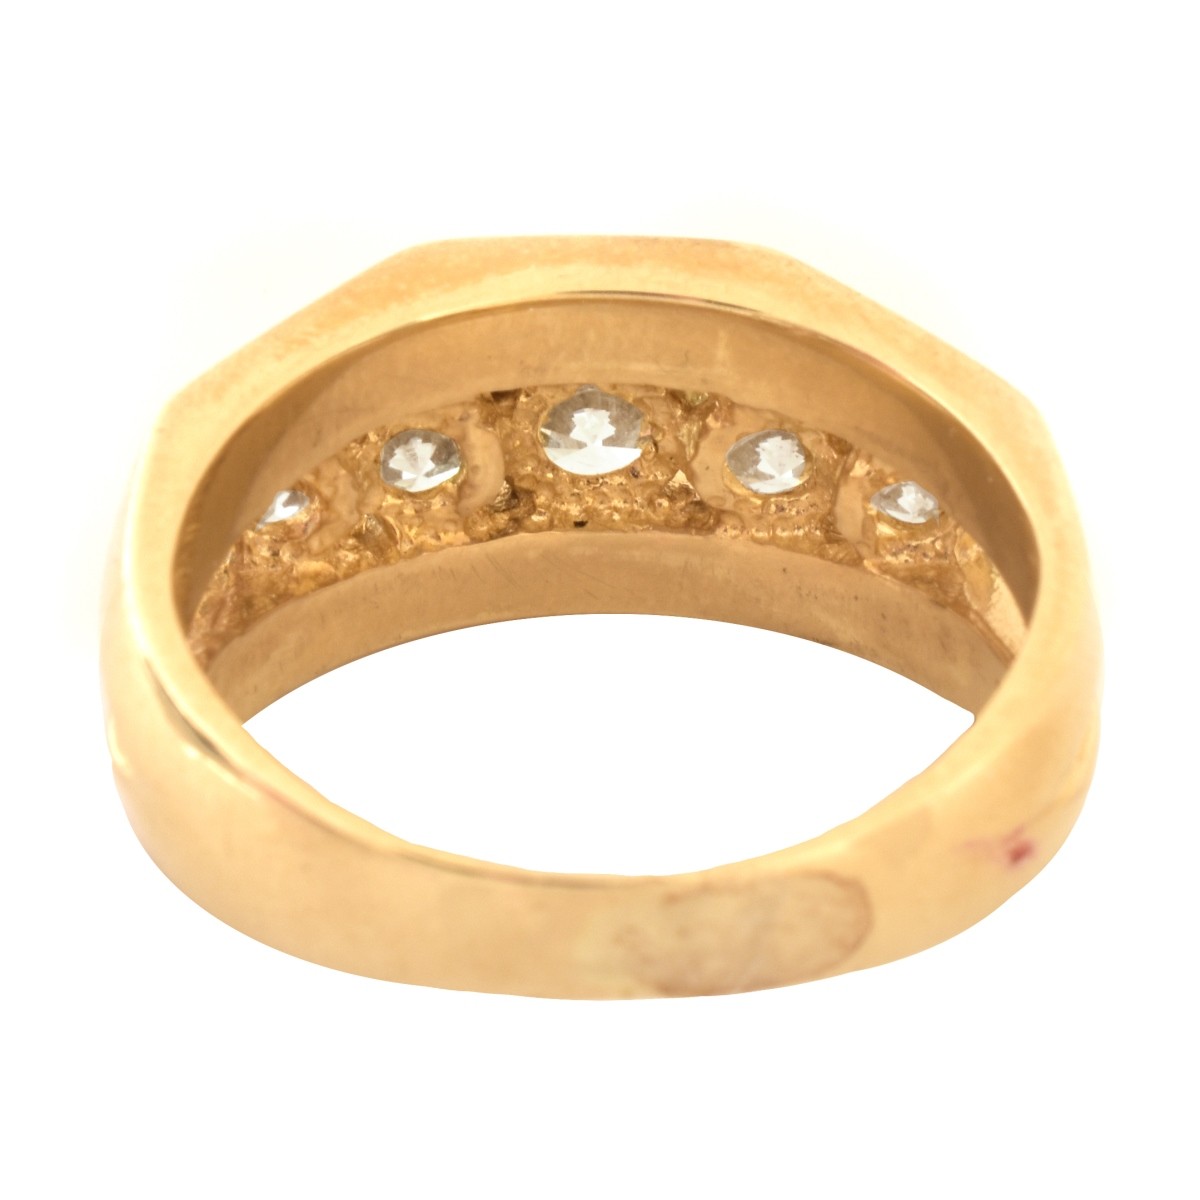 Man's 1.75ct Diamond and 14K Gold Ring